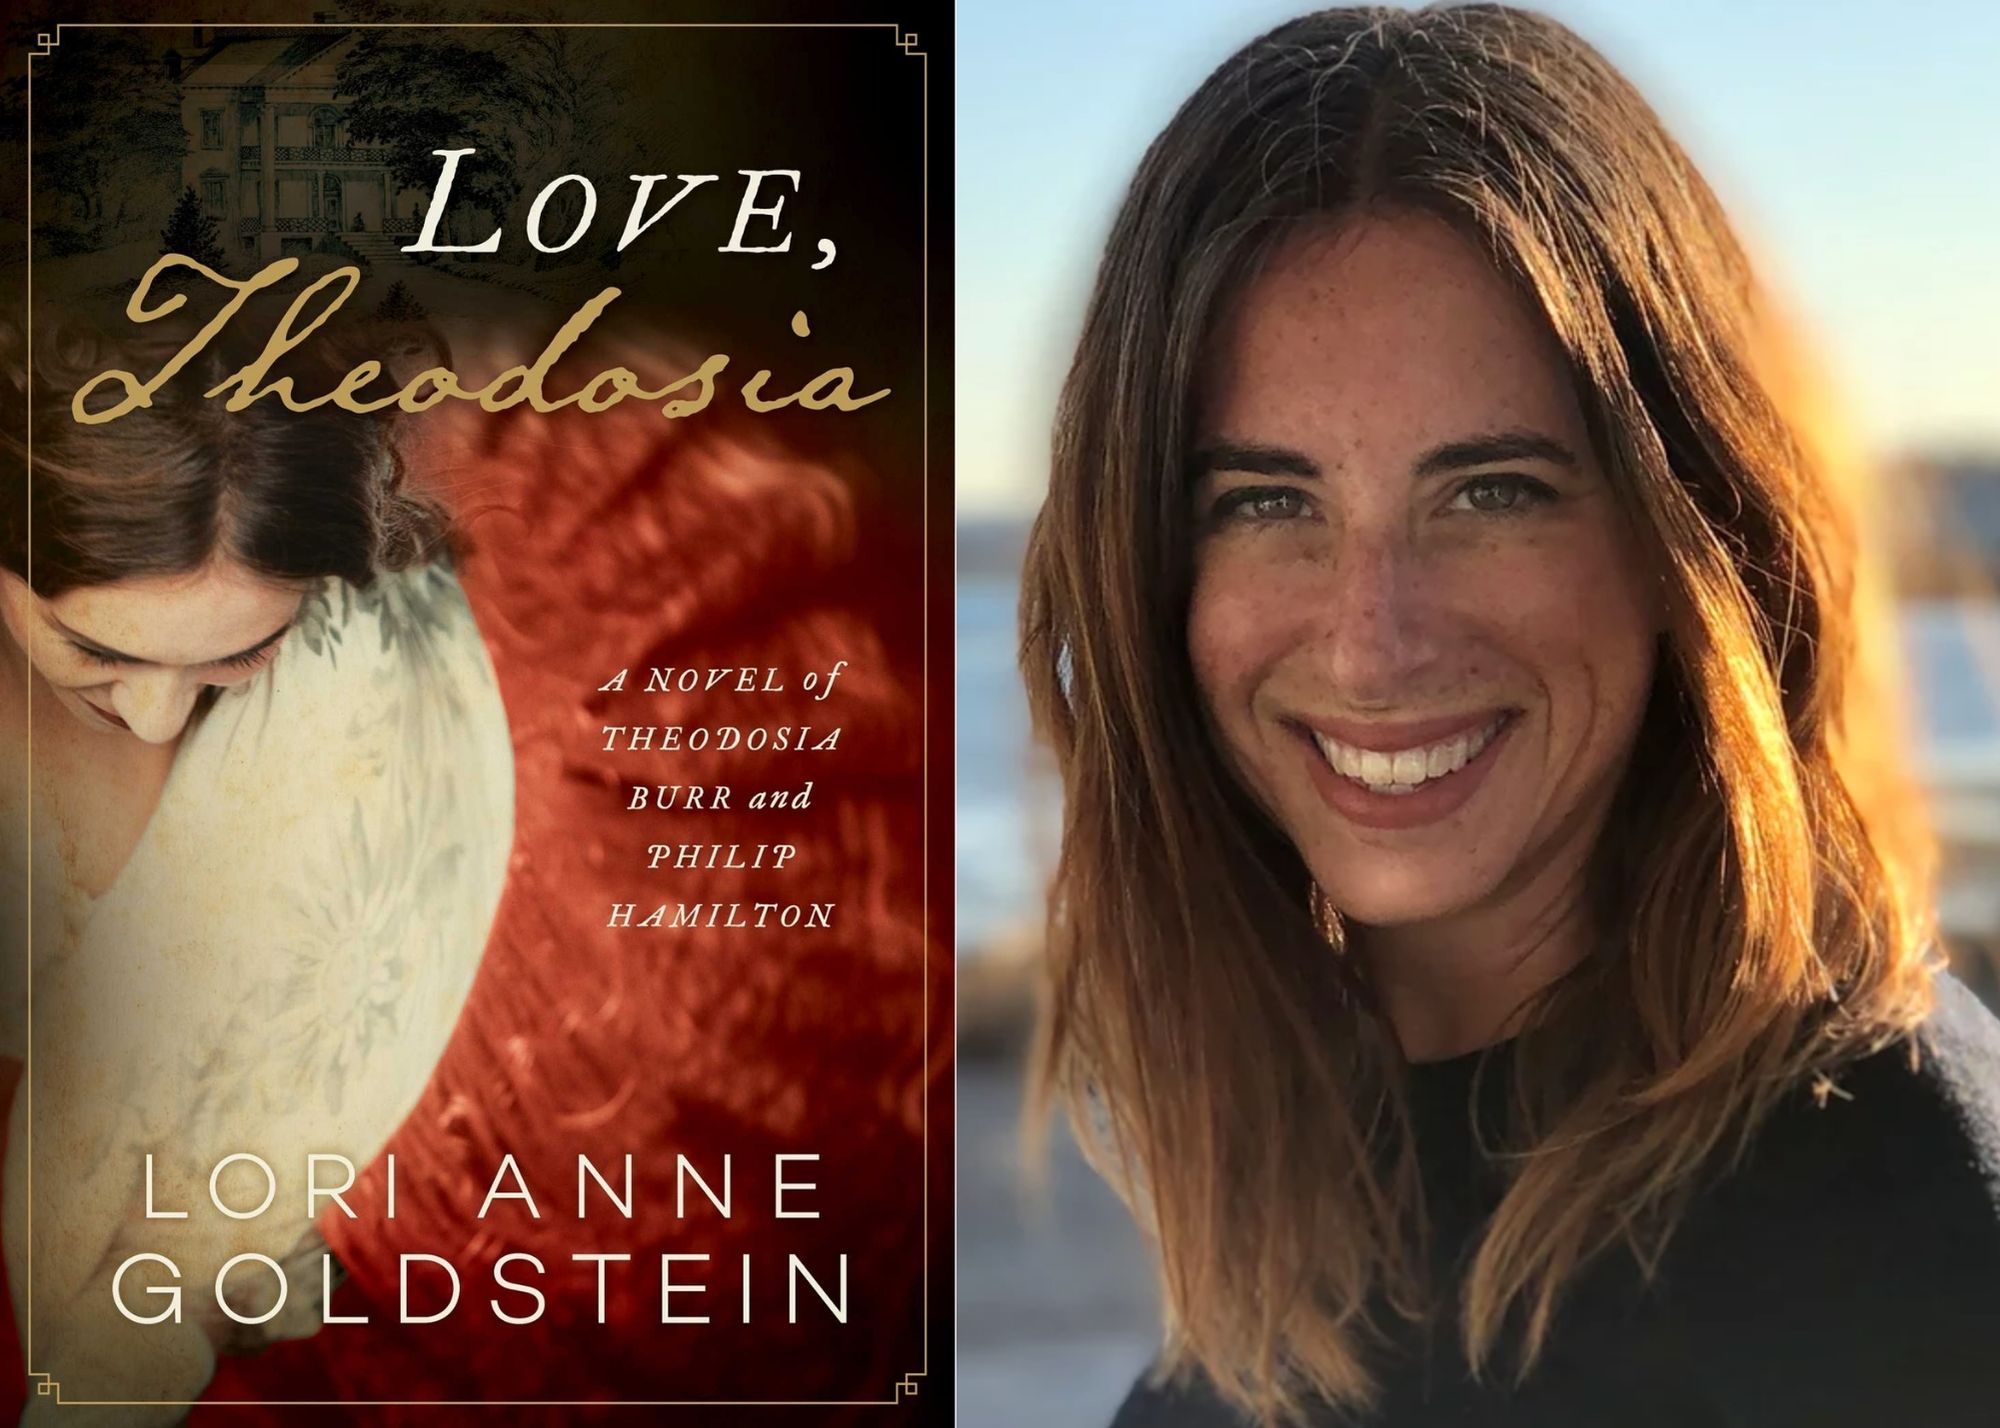 Book Review: Love, Theodosia by Lori Anne Goldstein